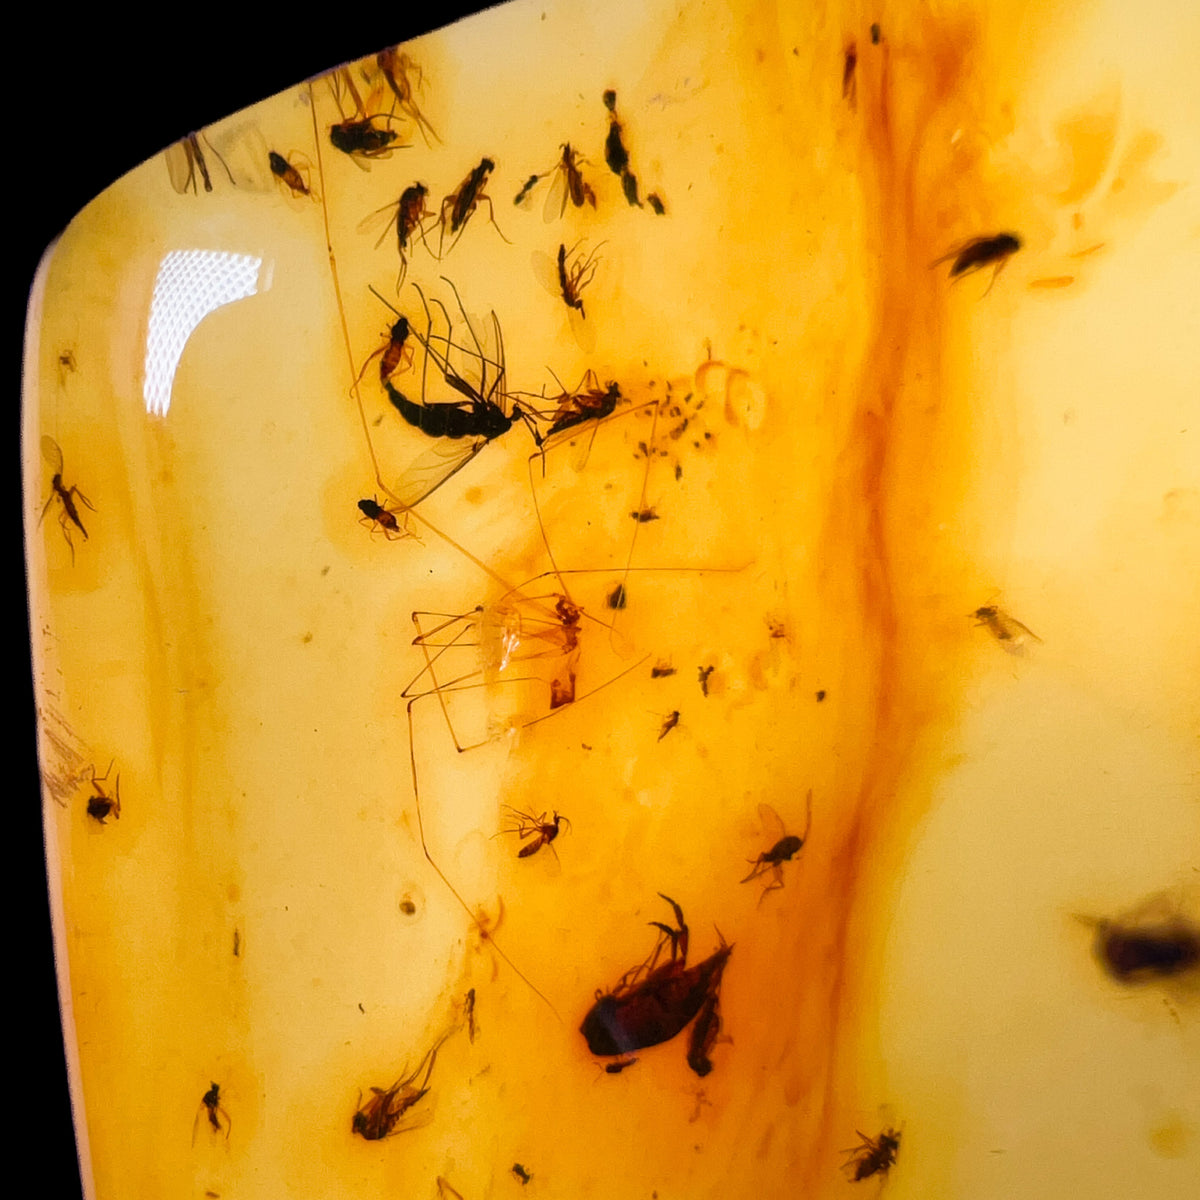 Close up of Insects and spider in Amber